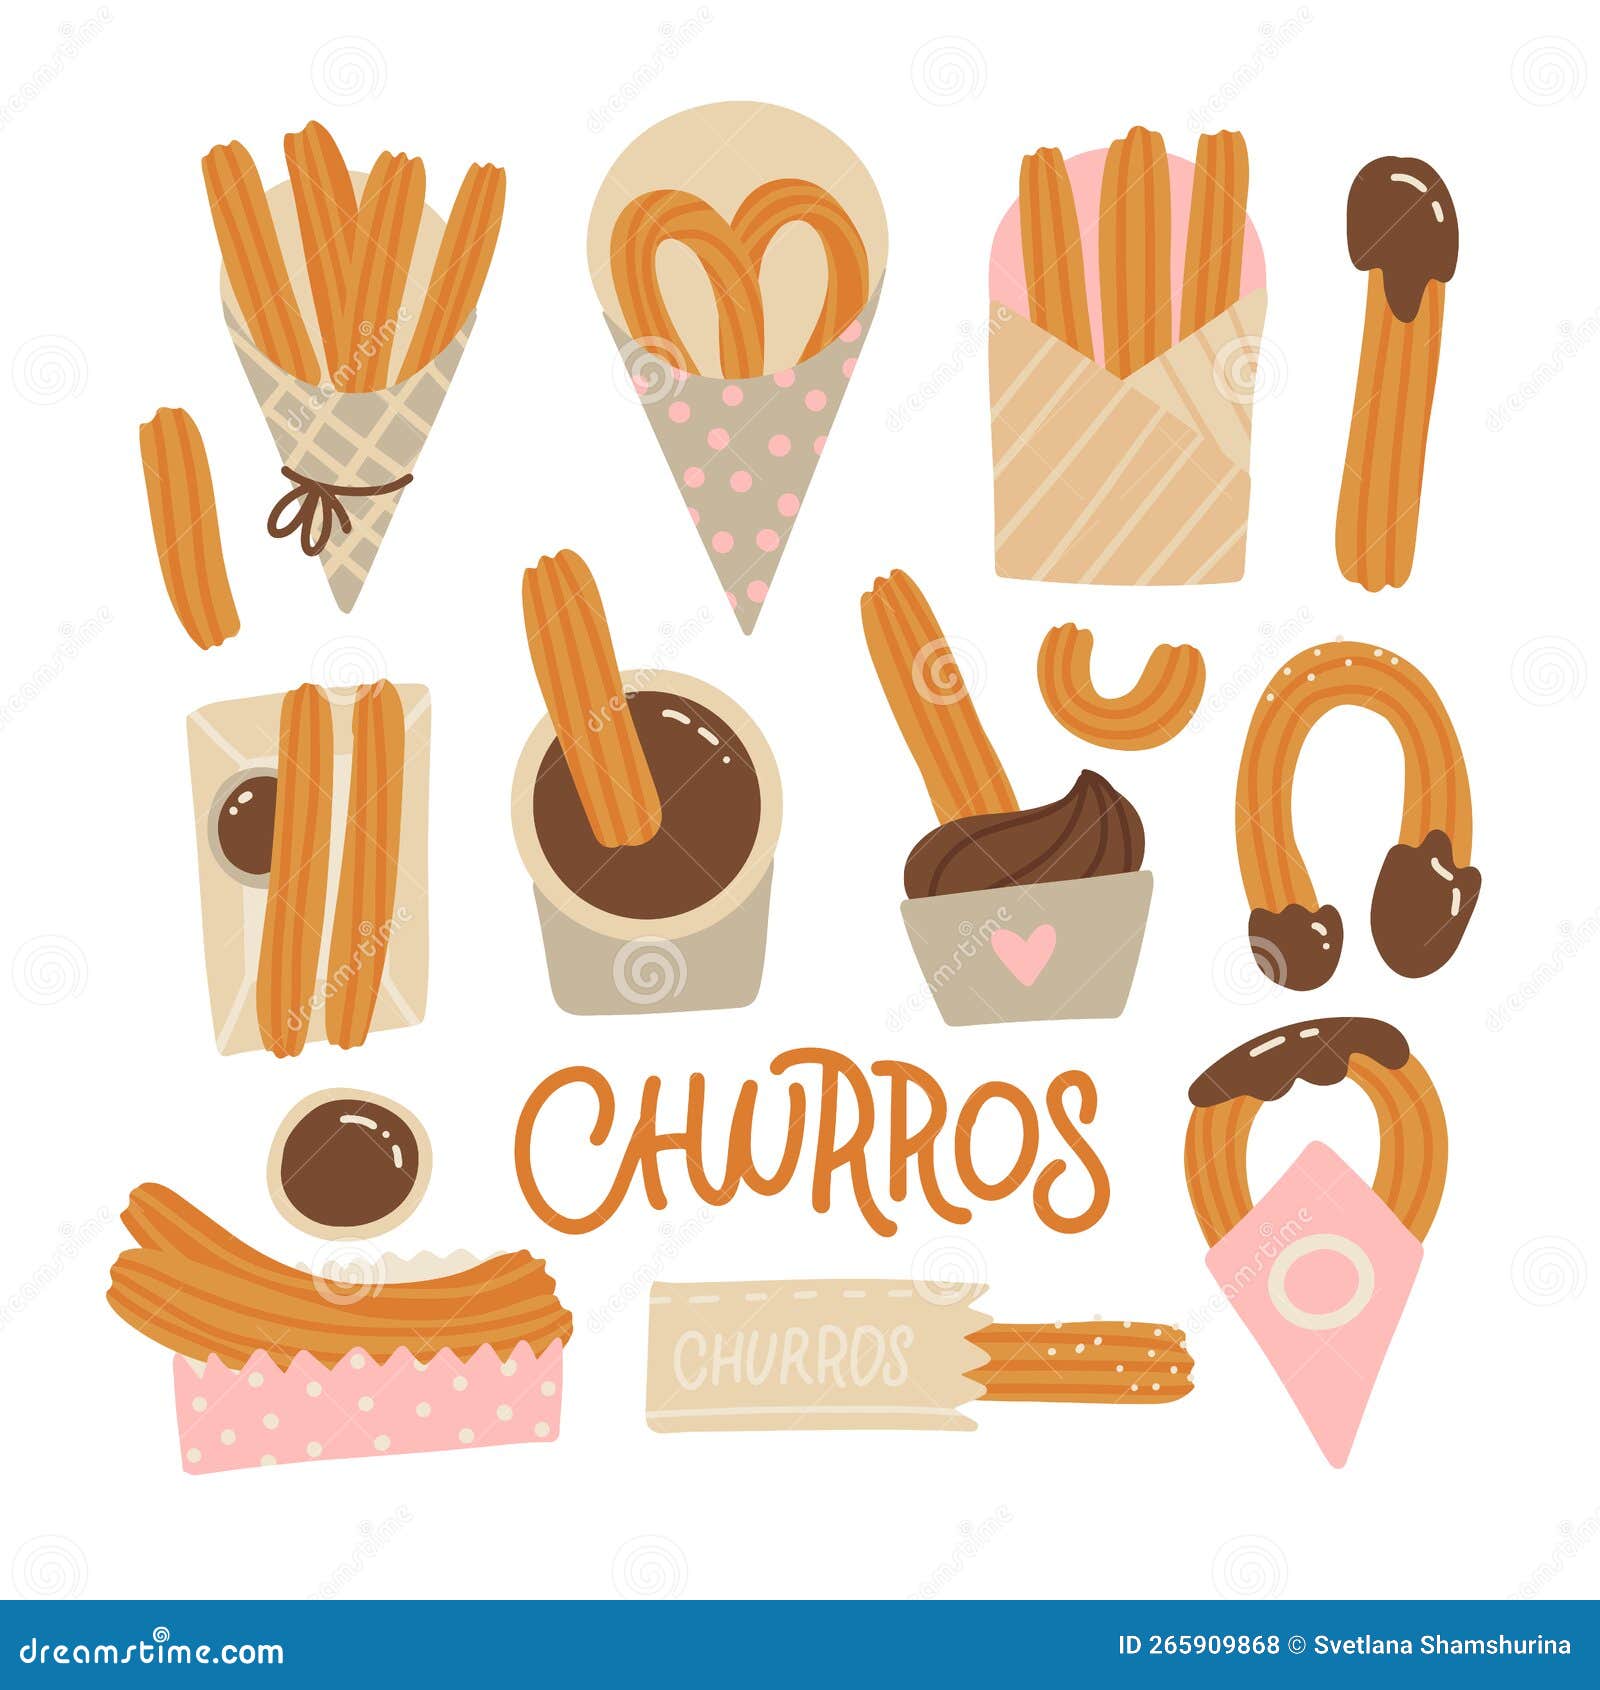 churros set . mexican chocolate confection. churro food in different packages. flat hand drawn  .